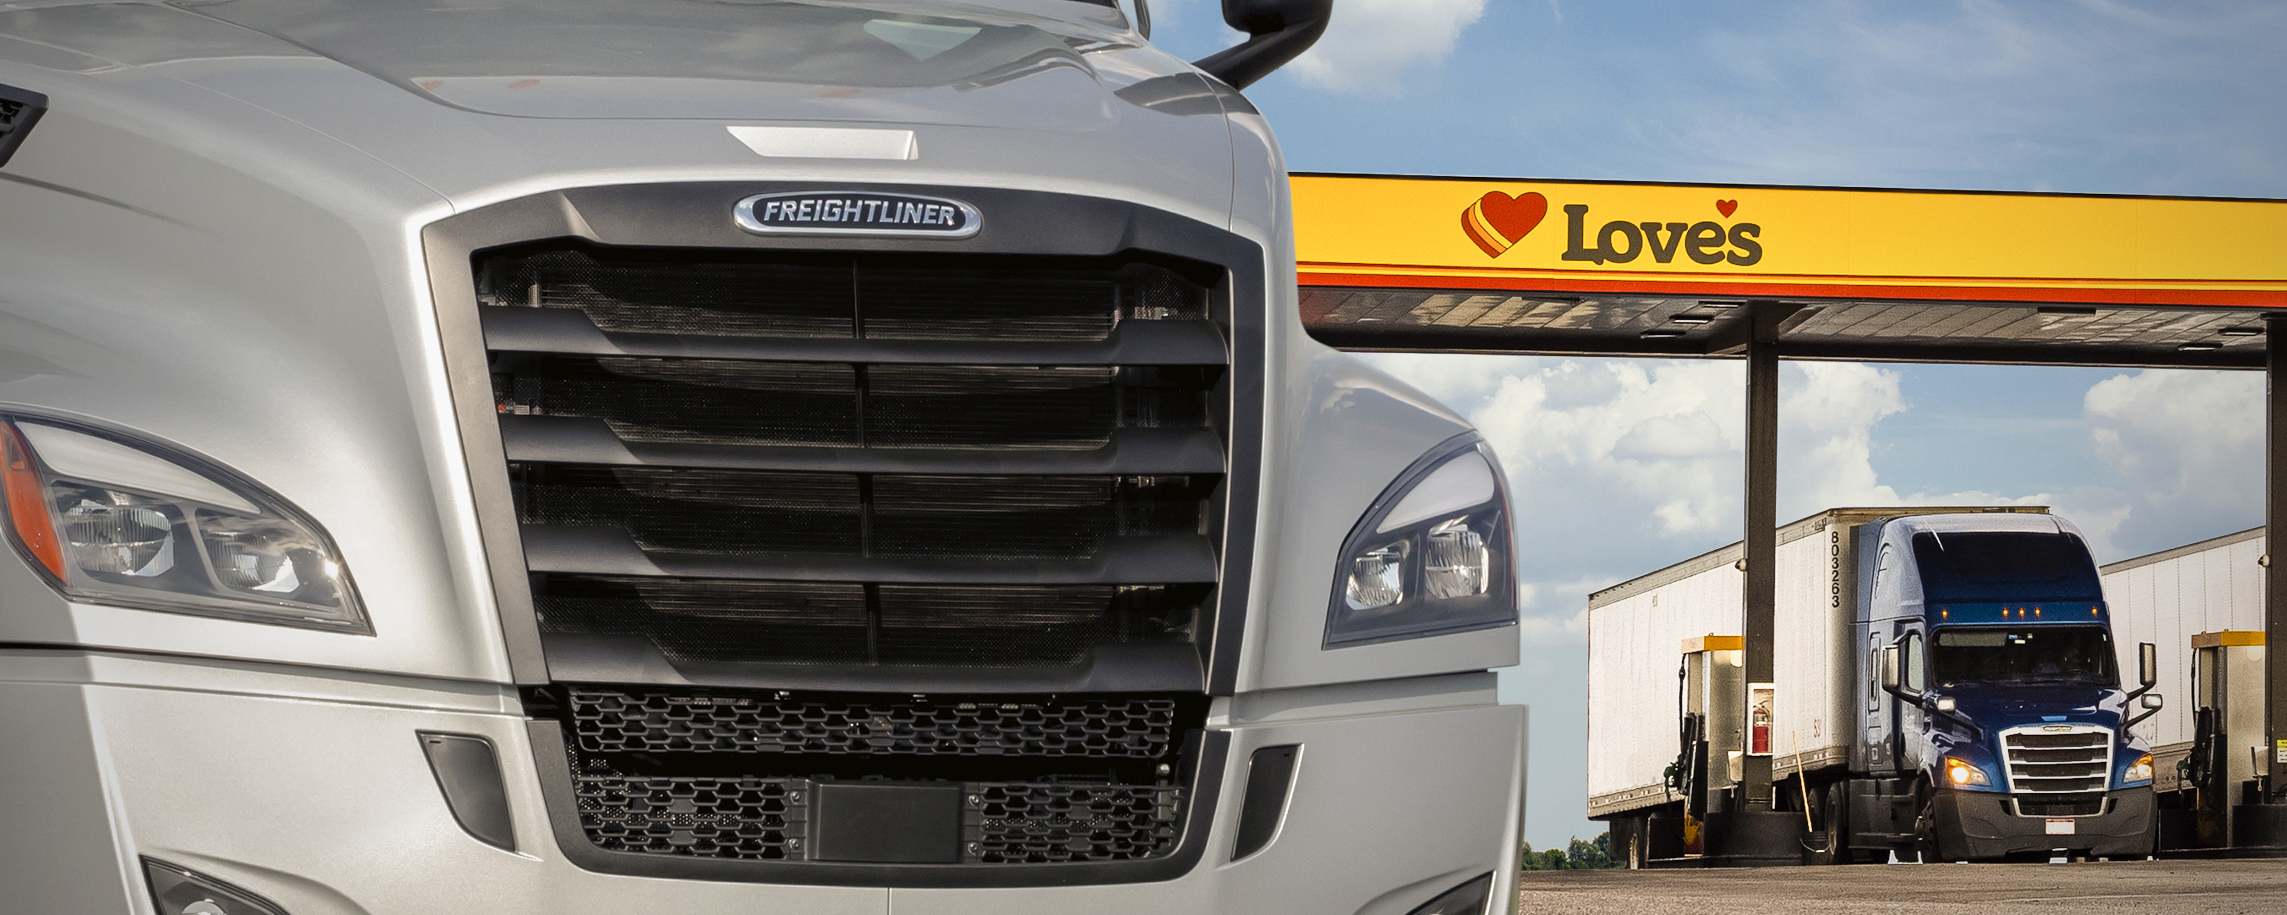 A photo of a Freightliner truck at a Love's Travel Stops